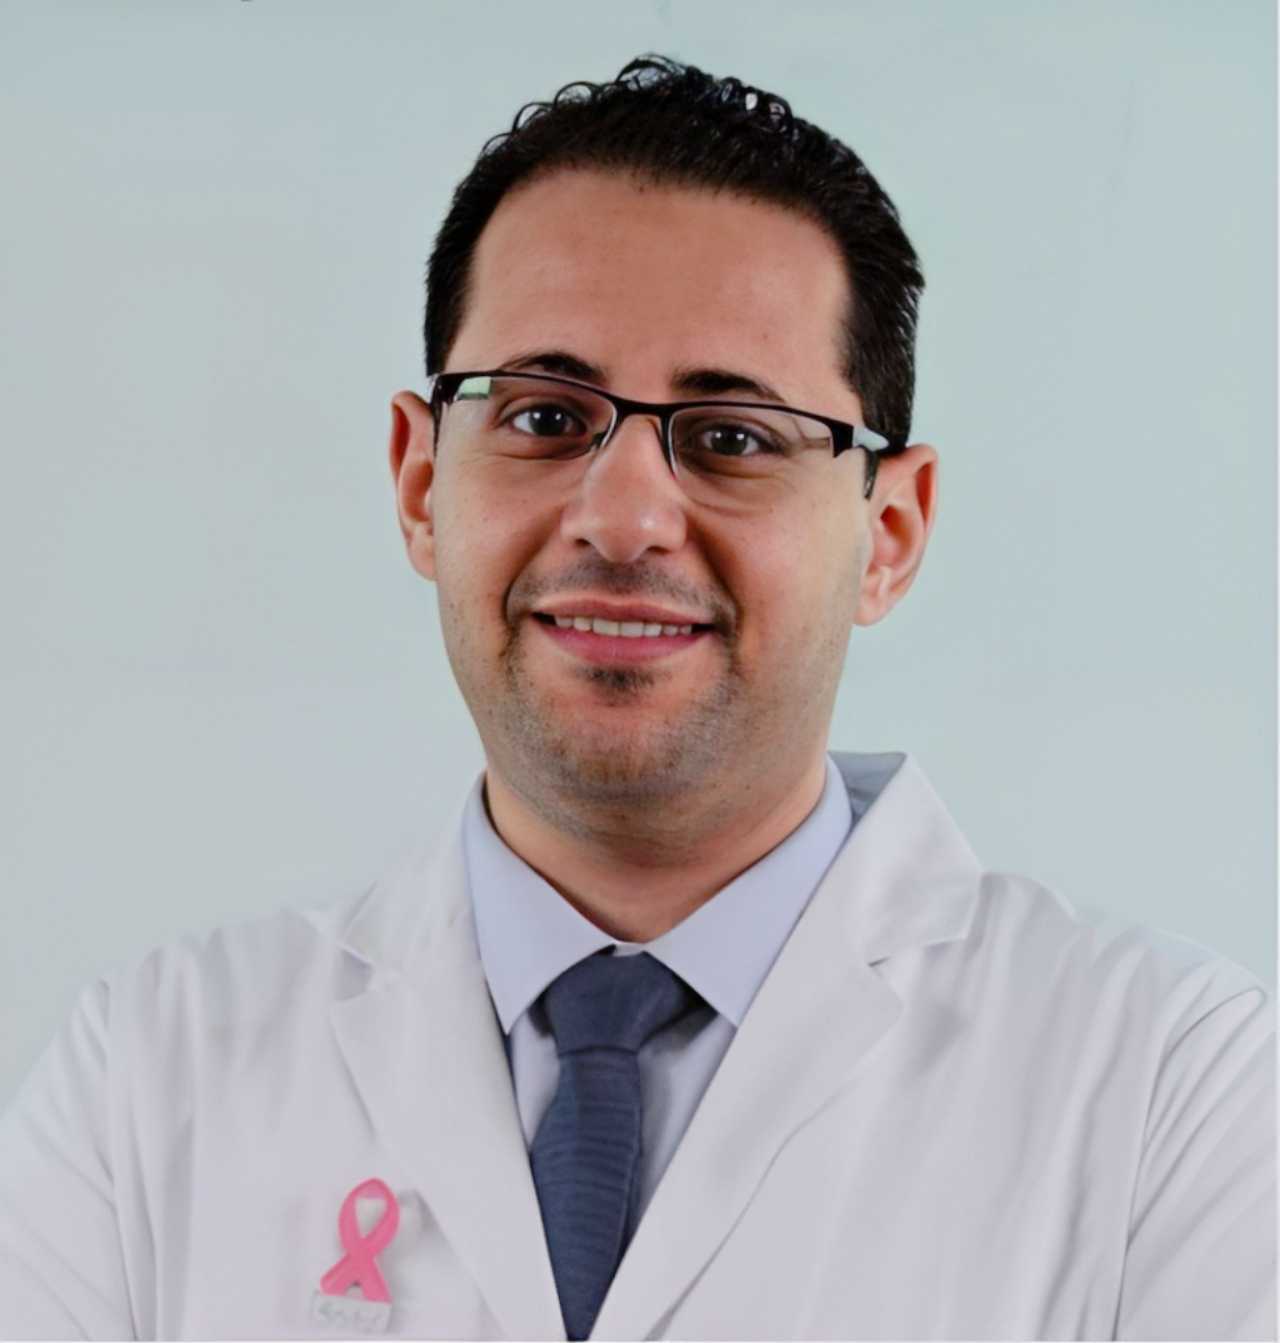 Dr. Mahmoud Gamal Mohamed Hassaan